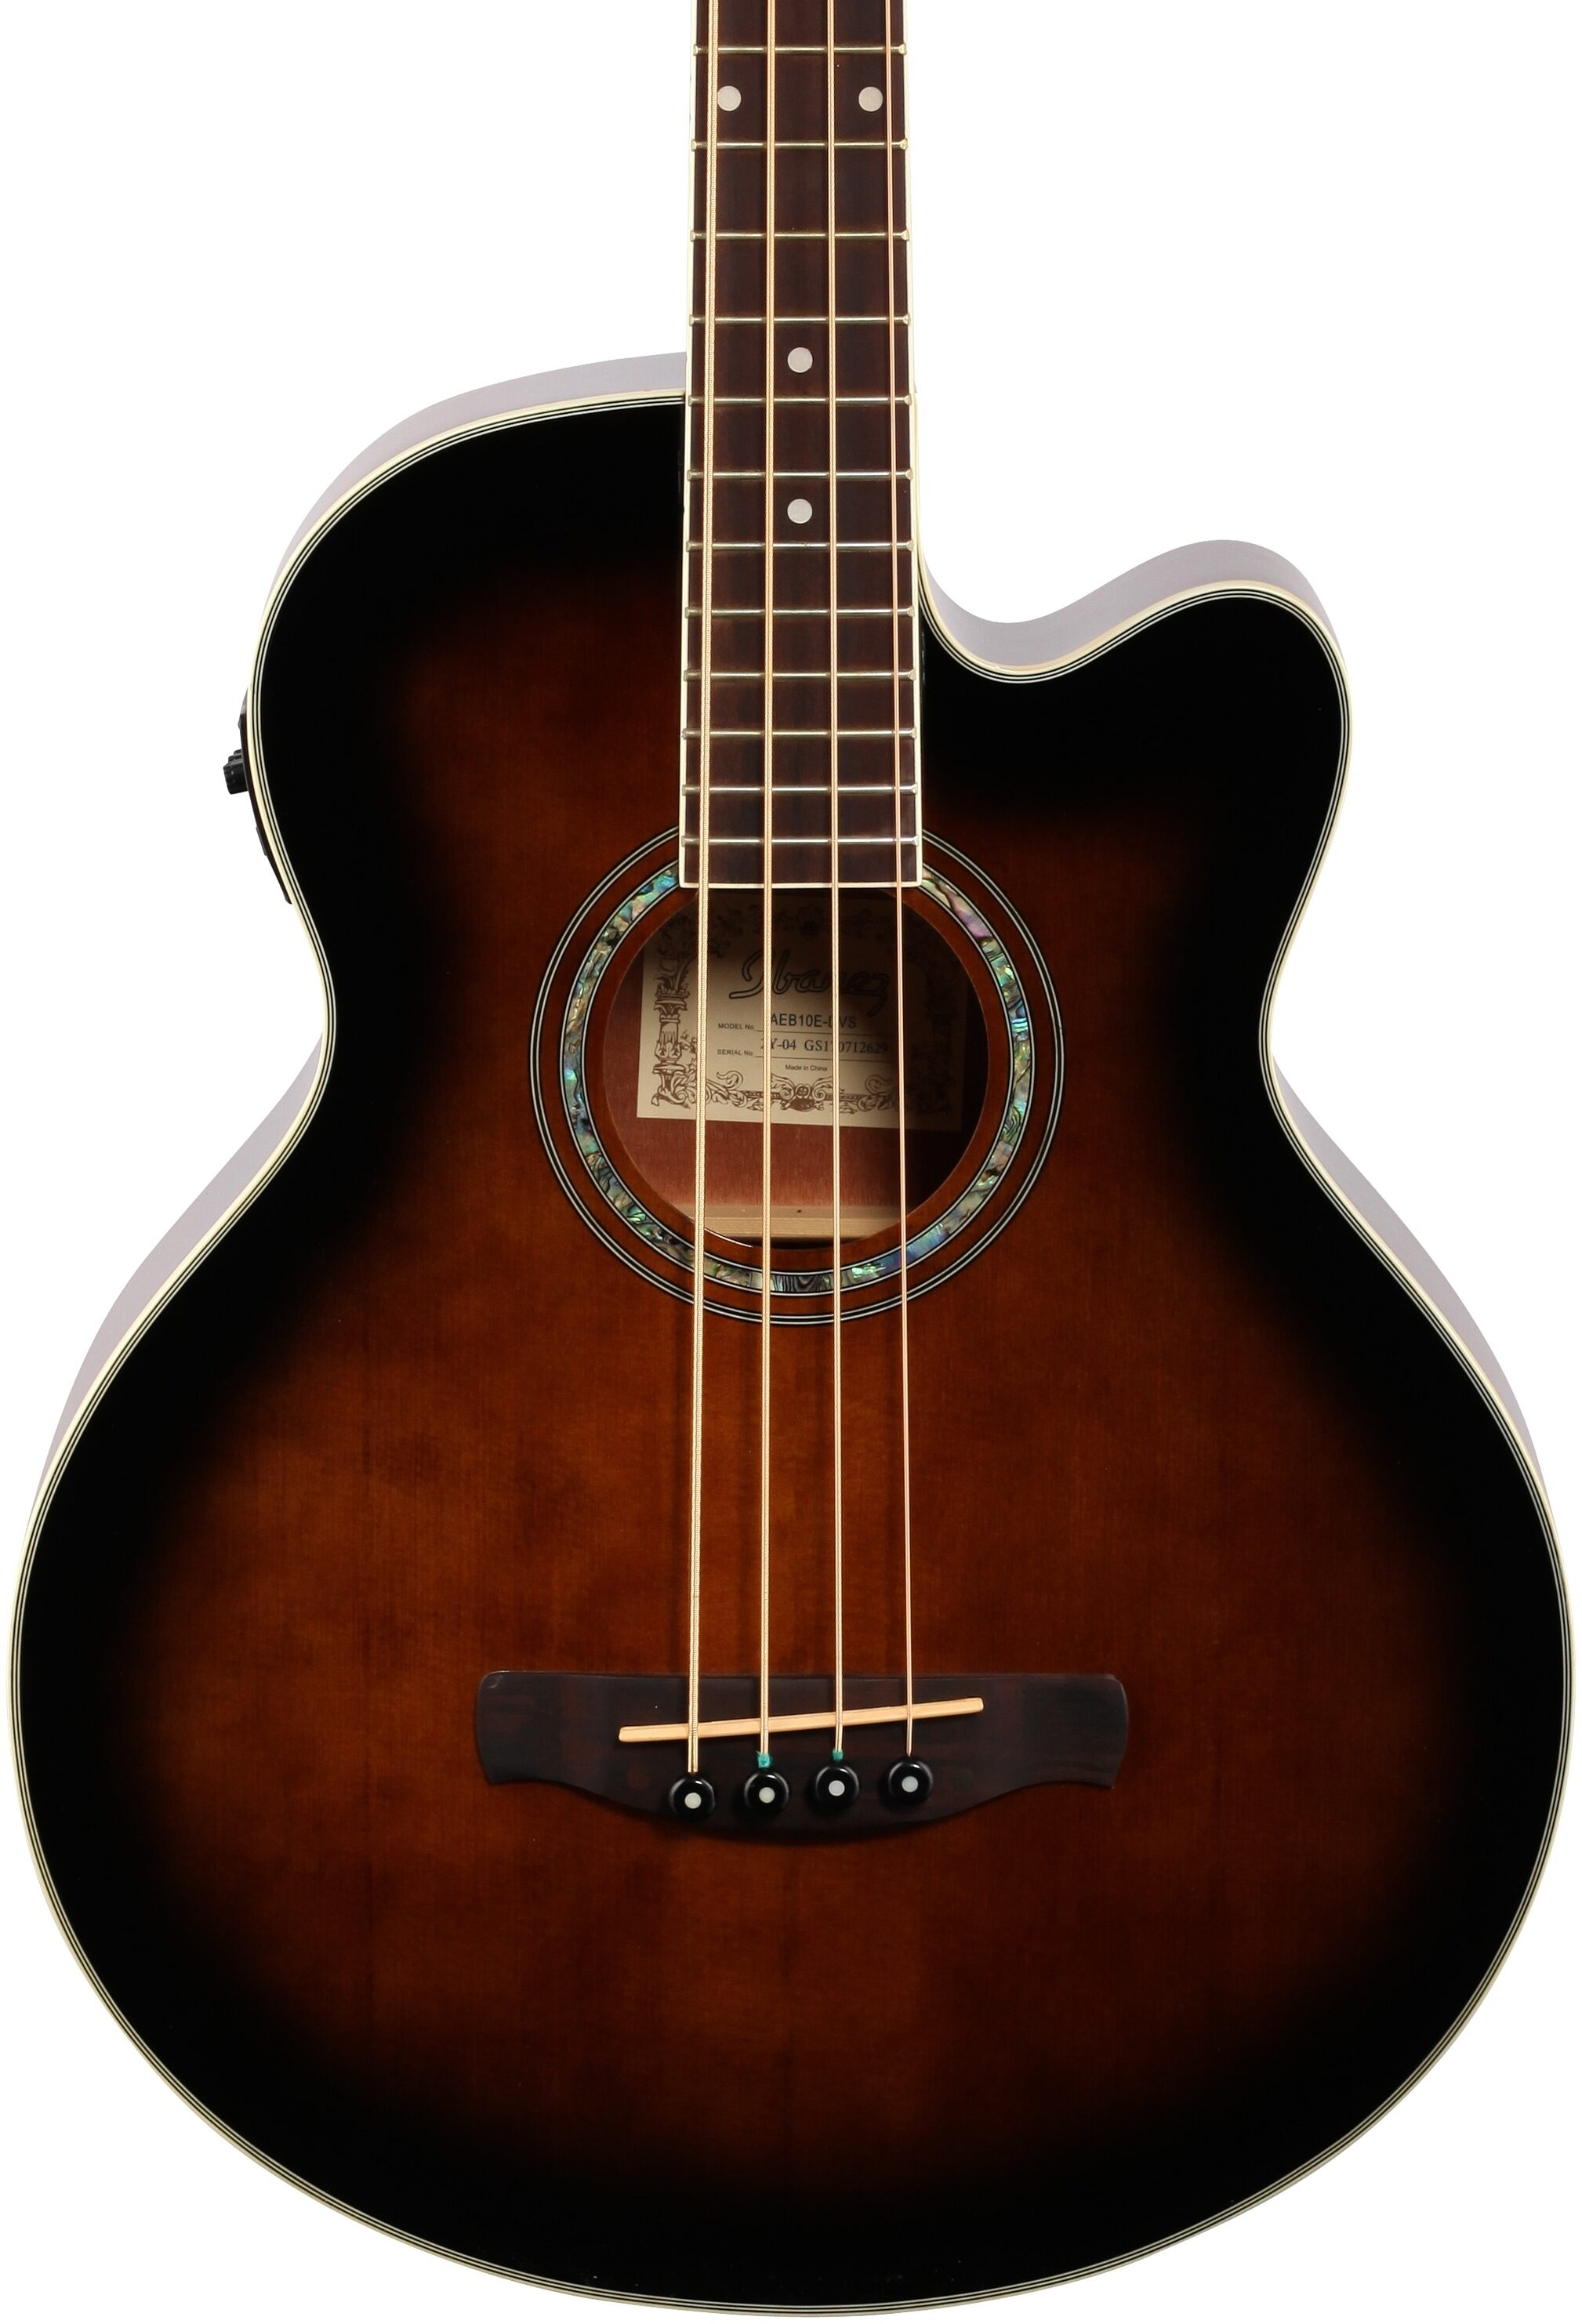 Ibanez AEB10E Acoustic-Electric Bass